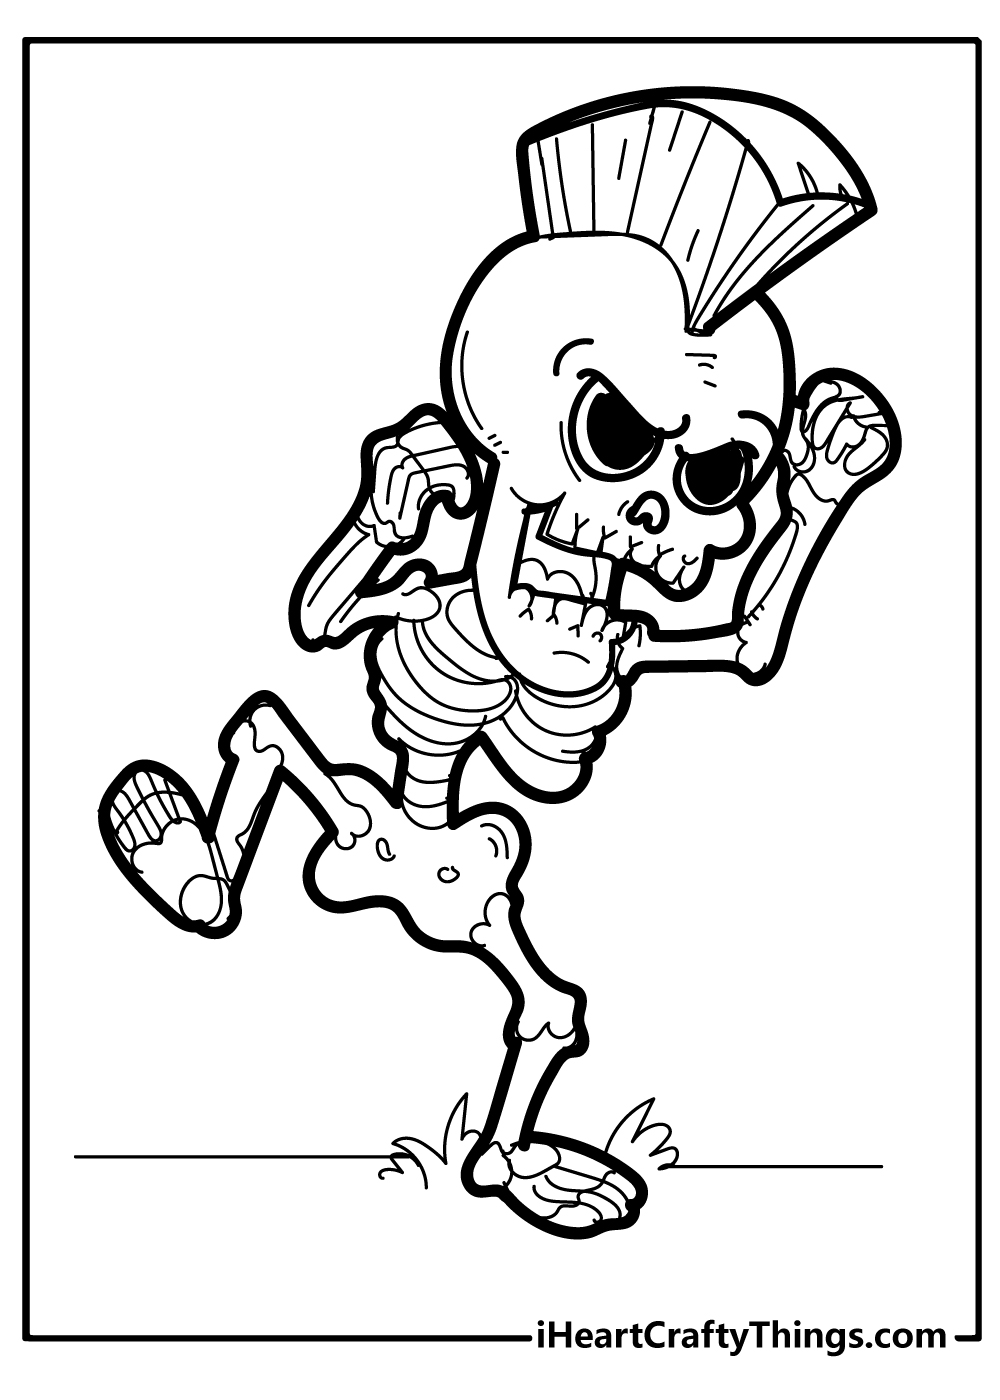 Skeleton Coloring Pages for preschoolers free printable